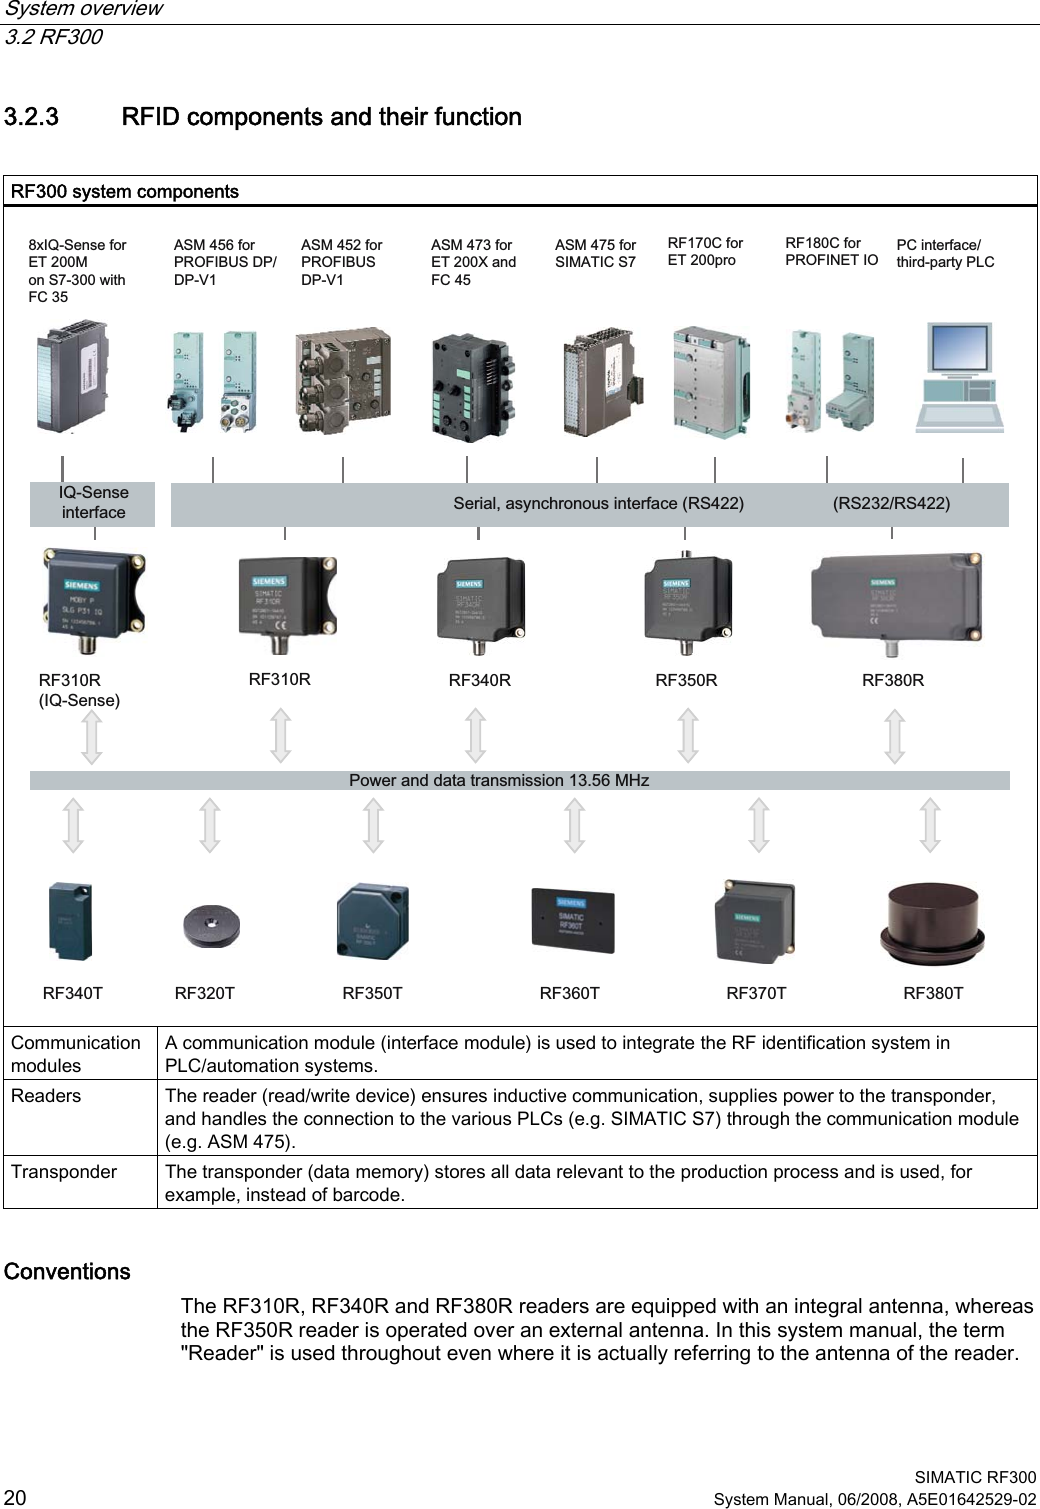 System overview   3.2 RF300  SIMATIC RF300 20 System Manual, 06/2008, A5E01642529-02 3.2.3 RFID components and their function  RF300 system components  6HULDODV\QFKURQRXVLQWHUIDFH565)7 5)73RZHUDQGGDWDWUDQVPLVVLRQ0+]5)5,46HQVH[,46HQVHIRU(70RQ6ZLWK)&amp;3&amp;LQWHUIDFHWKLUGSDUW\3/&amp;$60IRU6,0$7,&amp;65)&amp;IRU(7SUR$60IRU(7;DQG)&amp;$60IRU352),%86&apos;395)7 5)7 5)7 5)75)5 5)5 5)5$60bIRU352),%86&apos;3&apos;39,46HQVHLQWHUIDFH5)556565)&amp;IRU352),1(7,2  Communication modules A communication module (interface module) is used to integrate the RF identification system in PLC/automation systems. Readers  The reader (read/write device) ensures inductive communication, supplies power to the transponder, and handles the connection to the various PLCs (e.g. SIMATIC S7) through the communication module (e.g. ASM 475). Transponder  The transponder (data memory) stores all data relevant to the production process and is used, for example, instead of barcode. Conventions The RF310R, RF340R and RF380R readers are equipped with an integral antenna, whereas the RF350R reader is operated over an external antenna. In this system manual, the term &quot;Reader&quot; is used throughout even where it is actually referring to the antenna of the reader. 